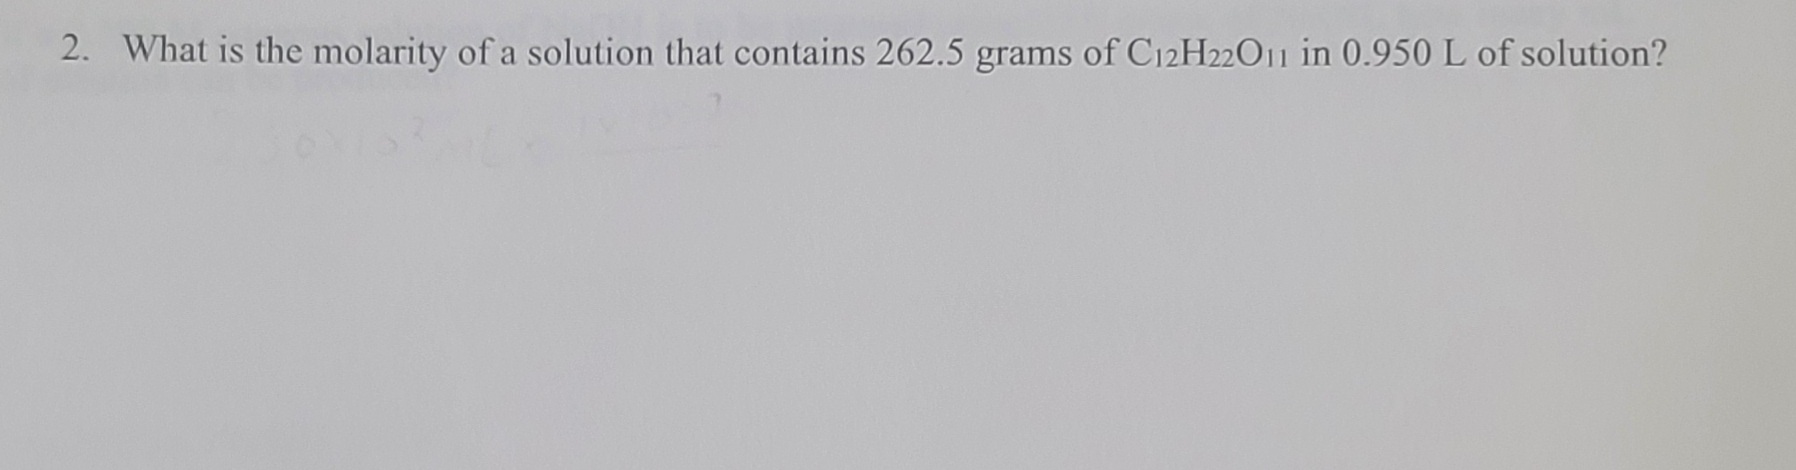 What is the molarity of a solution that contains 262.5 grams of C12H22O11 in 0.950 L of solution?
